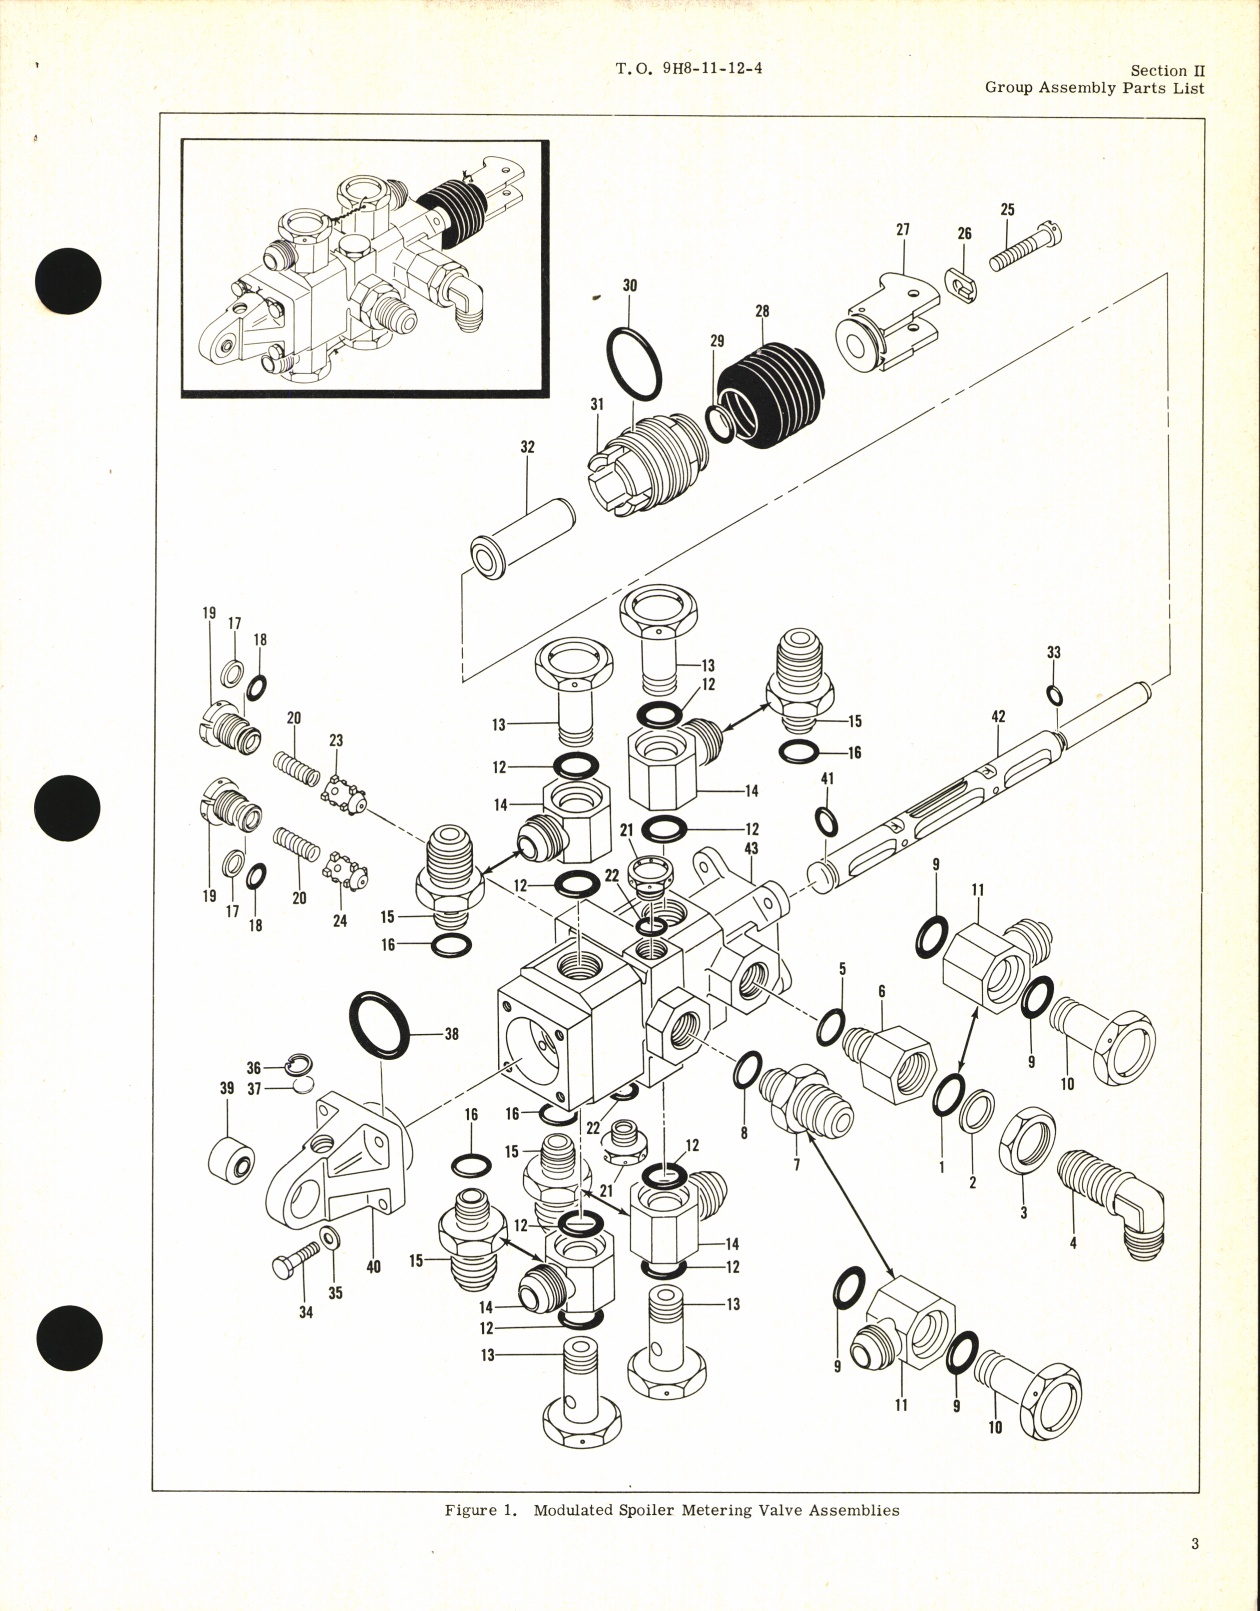 Sample page 3 from AirCorps Library document: Illustrated Parts Breakdown for Modulated Spoiler Metering Valve Assemblies